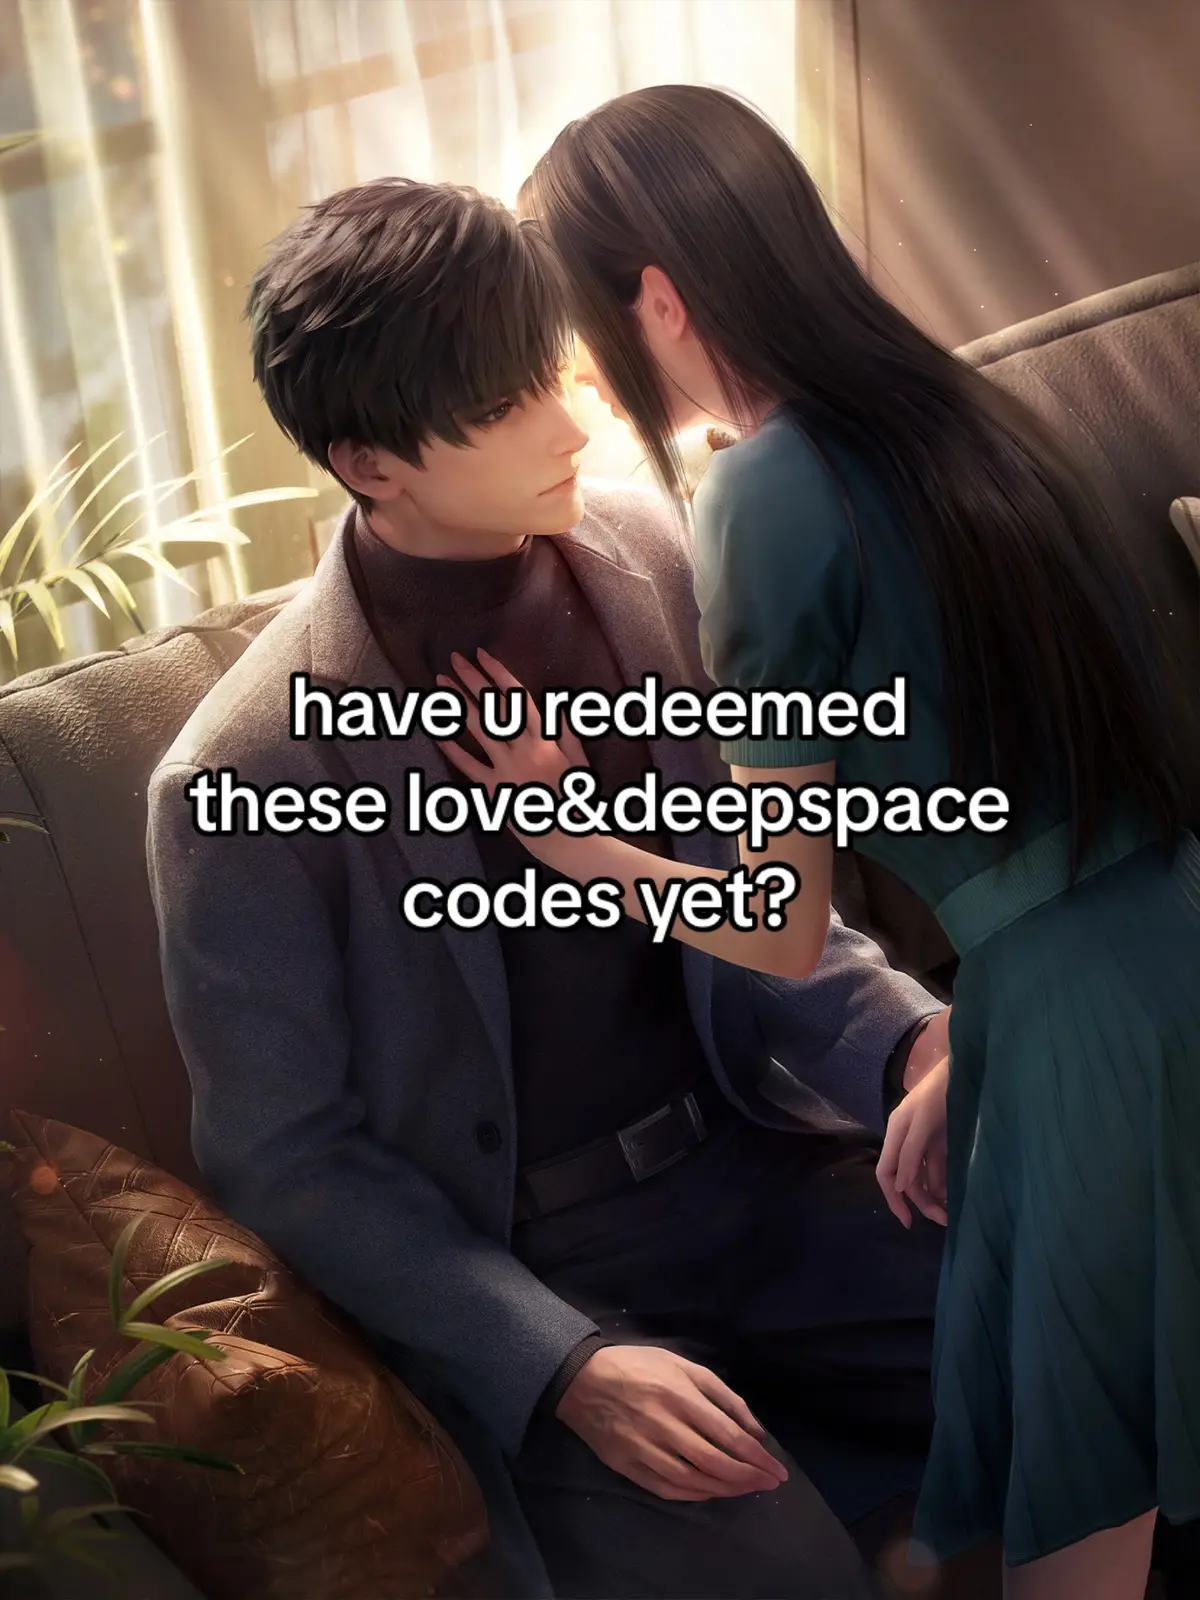 Check comments to easily copy & paste #loveanddeepspace #xavierloveanddeepspace #zayneloveanddeepspace #rafayelloveanddeepspace #calebloveanddeepspace #otomegame #fyp 